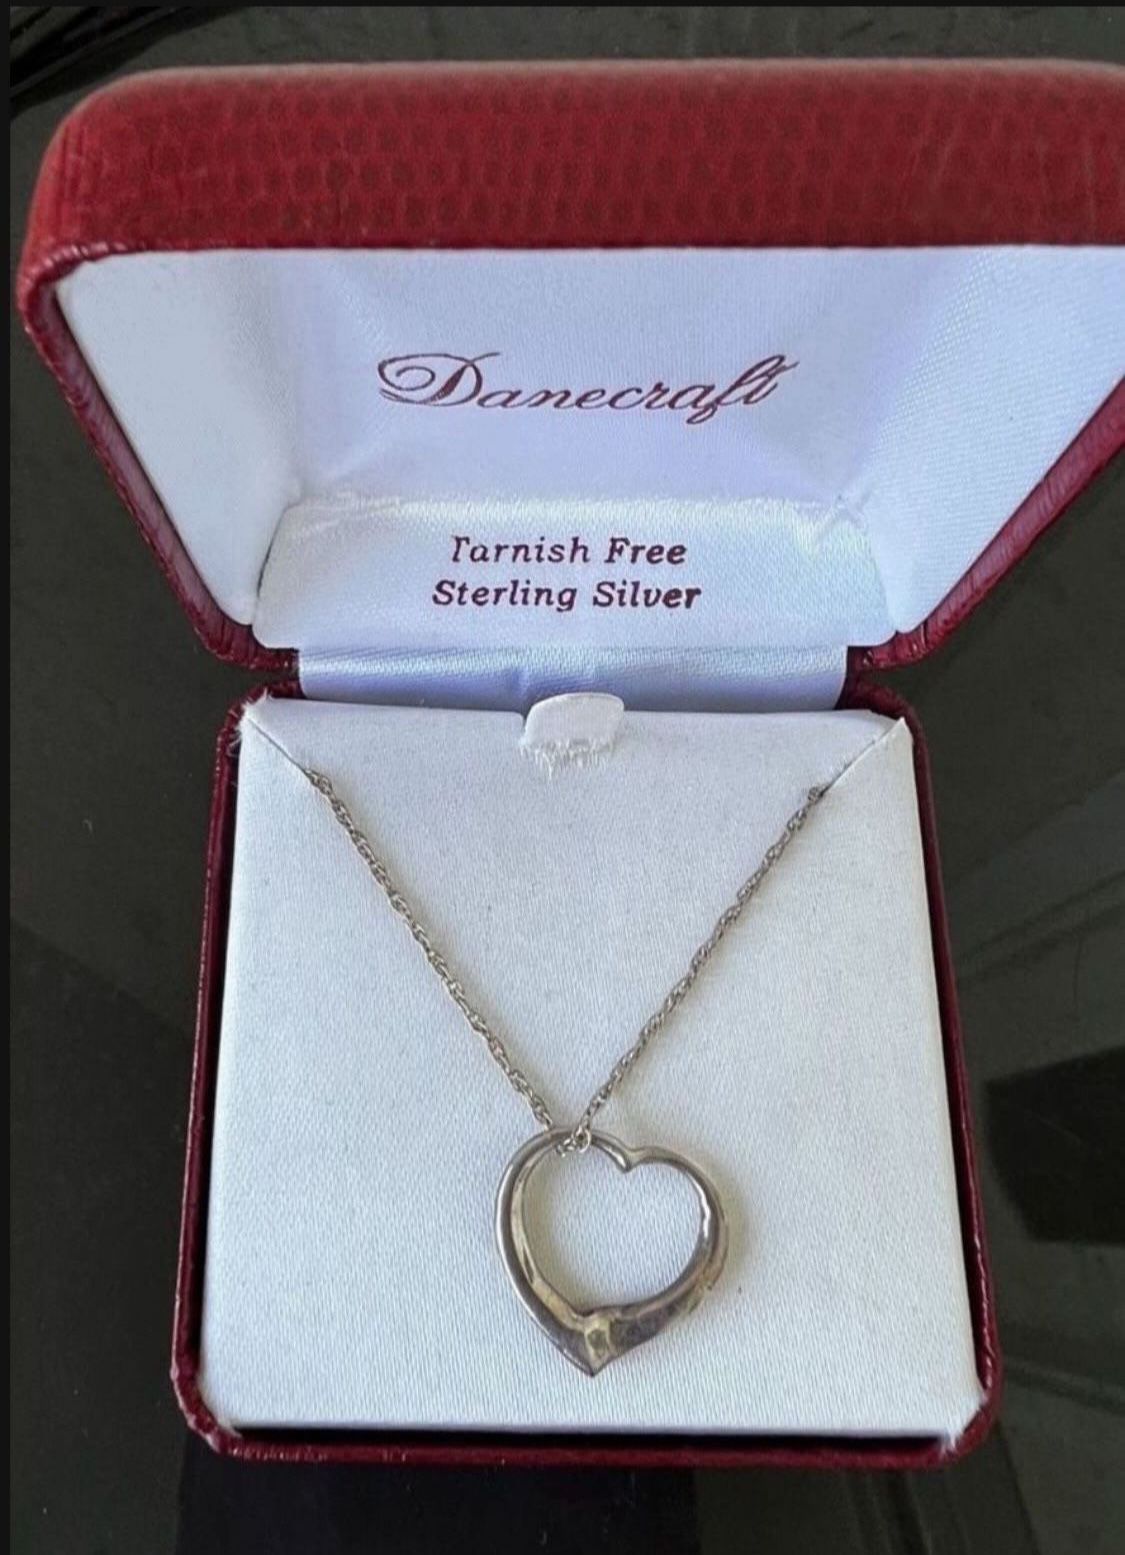 DaneCraft Tarnish Free 925 Sterling Silver Open Heart Pendant necklace  In great condition